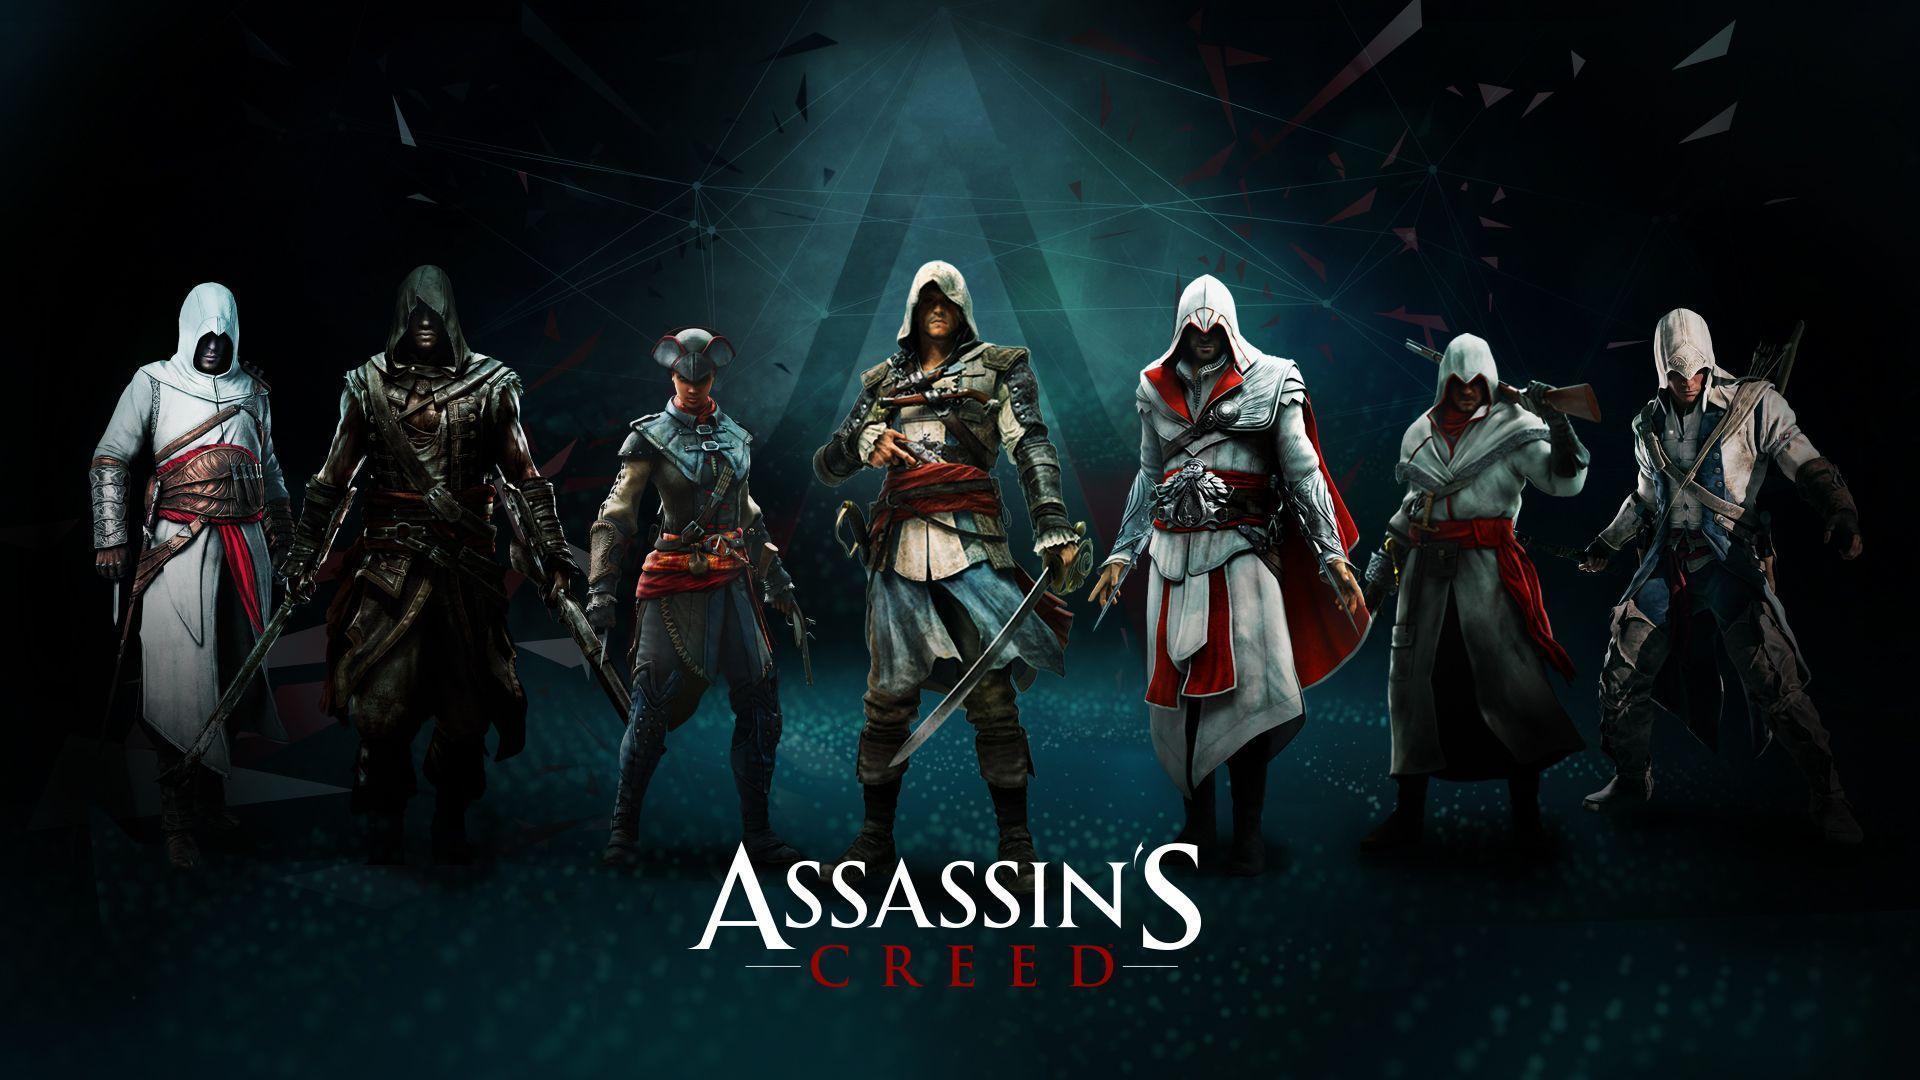 Assassin's Creed Full HD Wallpaper and Background Imagex1080